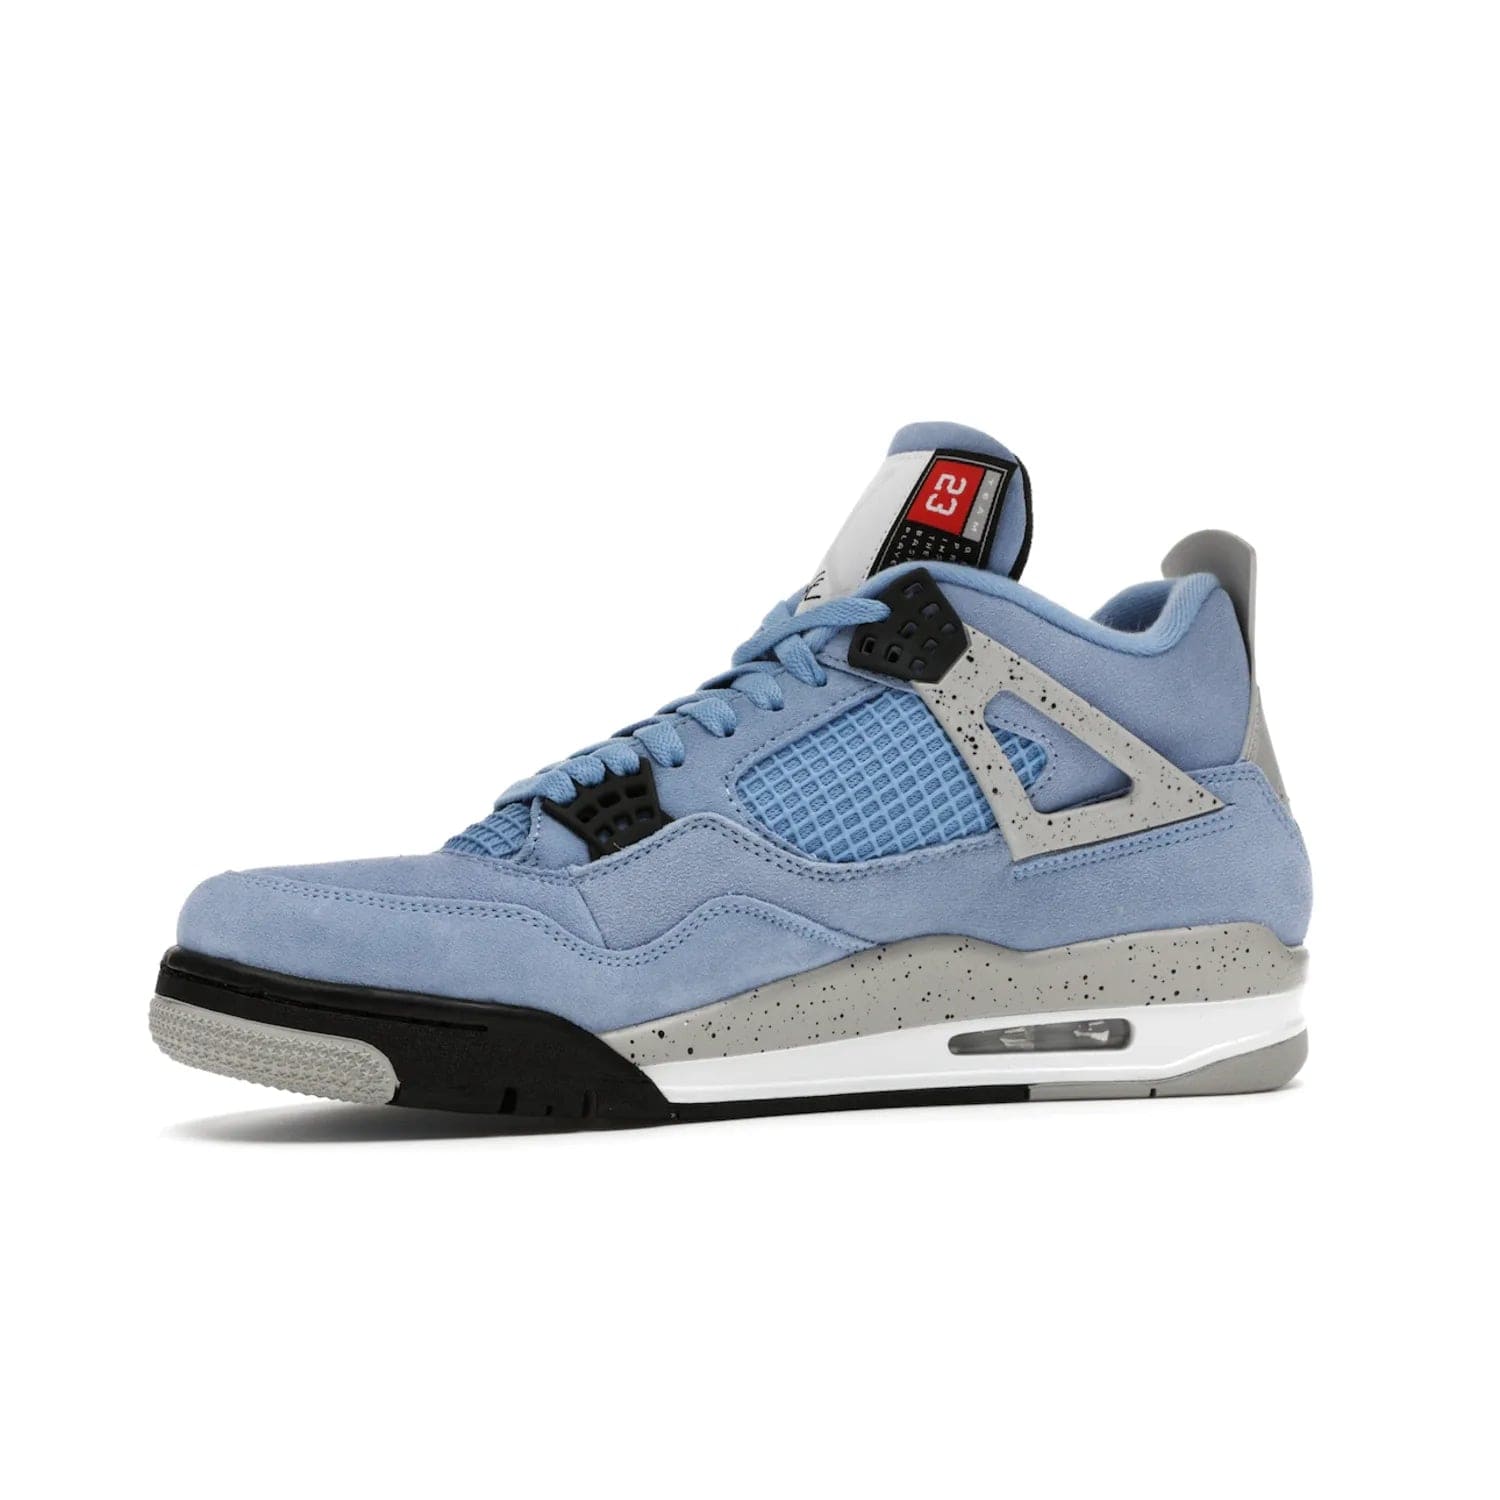 Jordan 4 Retro University Blue - Image 17 - Only at www.BallersClubKickz.com - The Air Jordan 4 University Blue honors MJ's alma mater. Rich University Blue suede, panels of netting, and Cement Grey speckled eyelets give this design an edgy look. Features a black, white and Tech Grey sole with a clear Air unit and two woven labels on the tongue. Jumpman logo & Team Jordan jock tag included. Released April 2021.